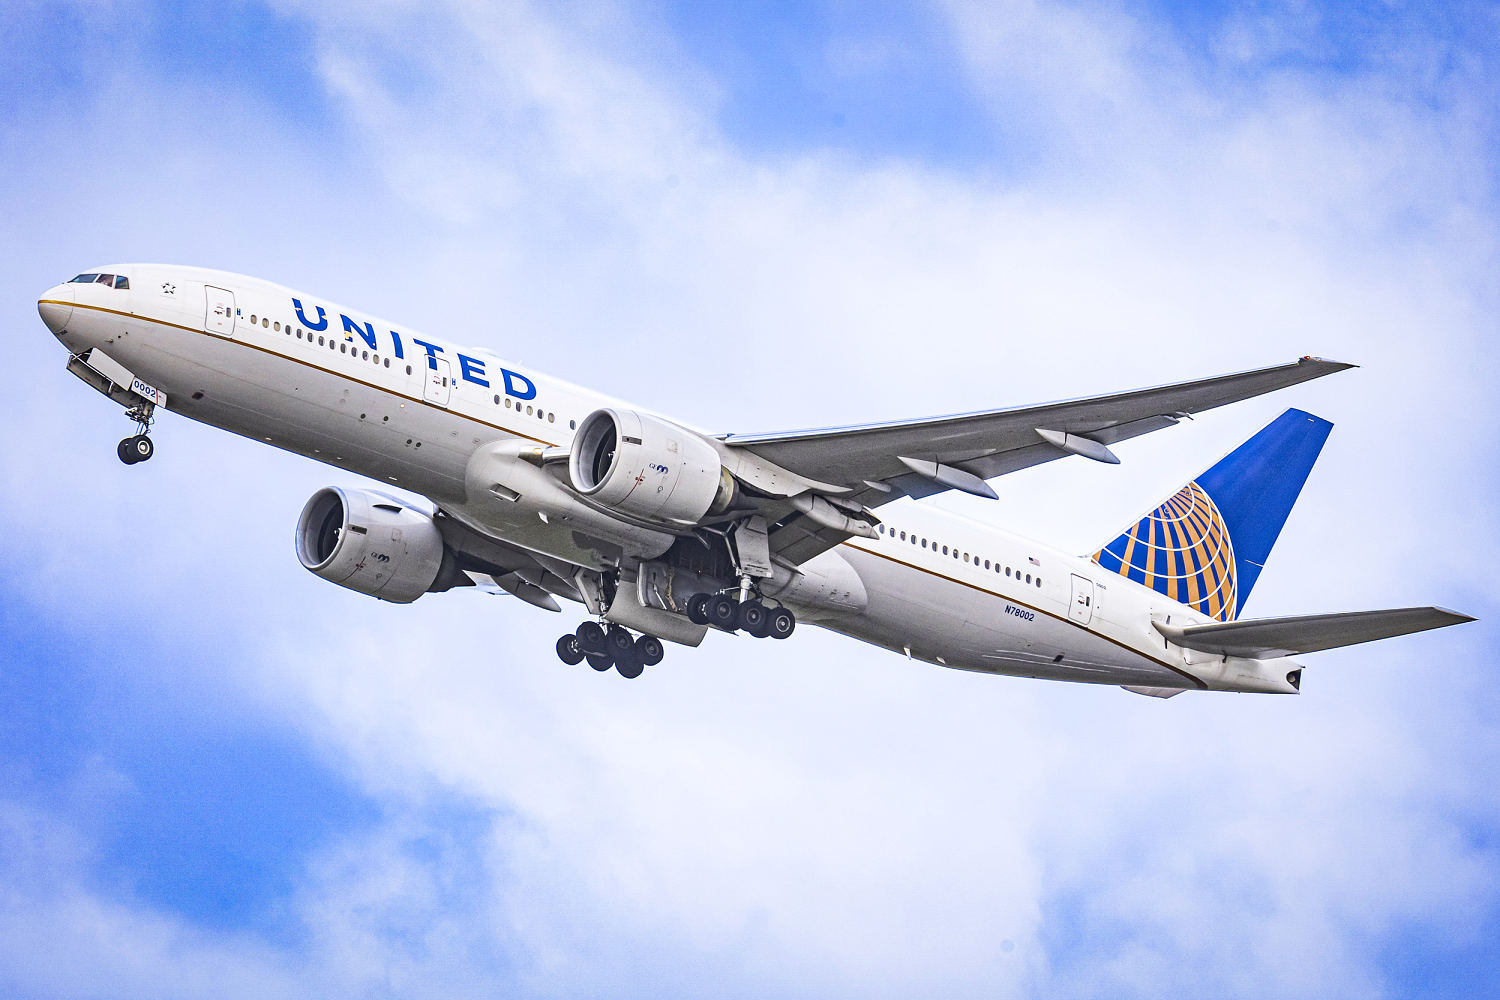 Mexico-bound plane lands in L.A. in 4th emergency this week for United Airlines